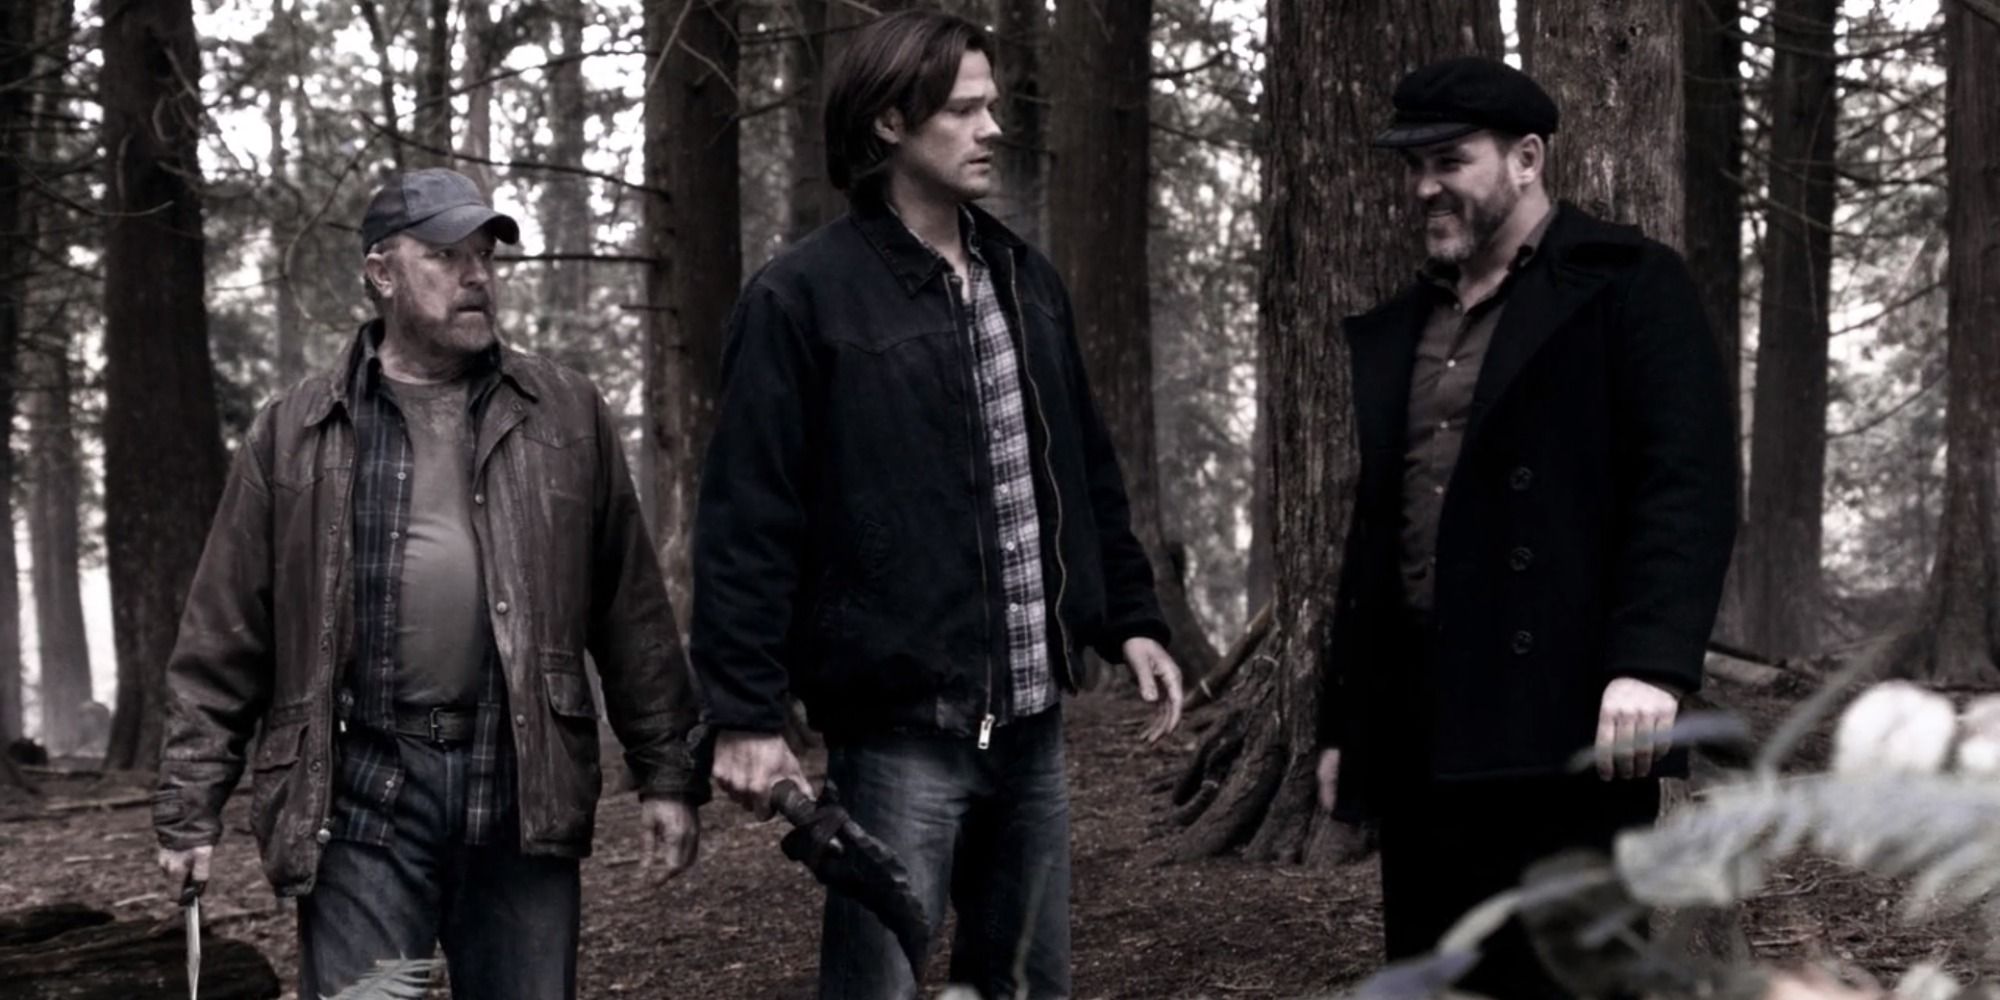 Benny returns to purgatory to safely bring back Sam and Bobby in Supernatural